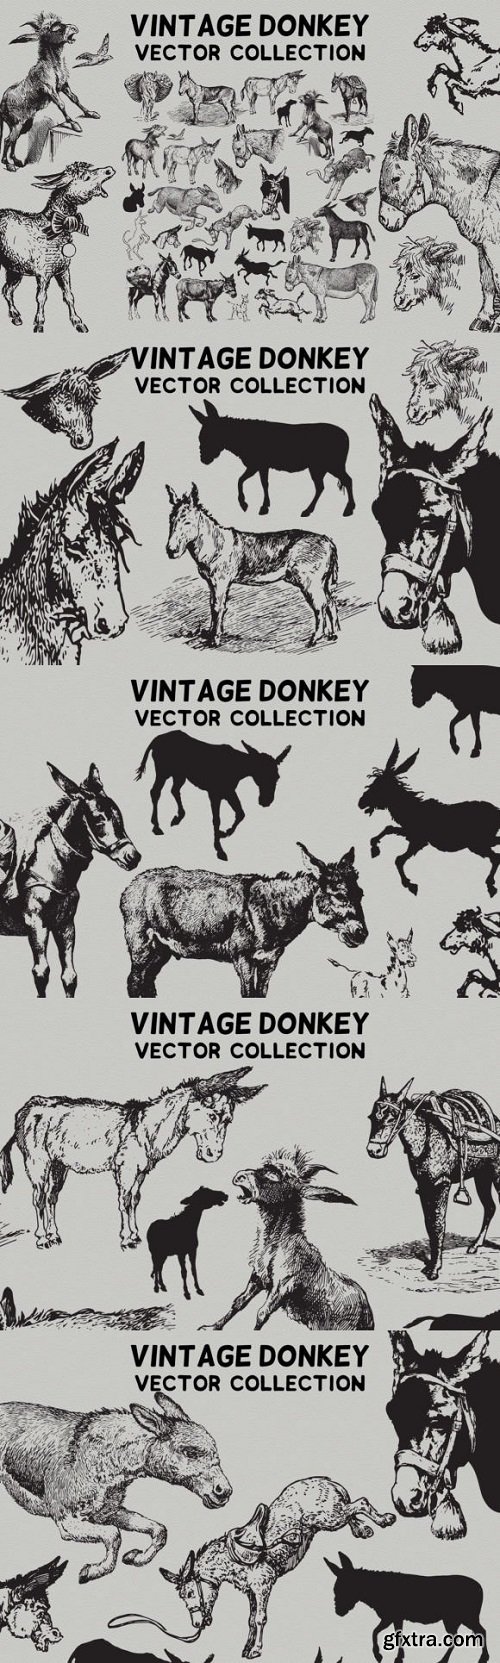 Vintage Donkey Vector Collection